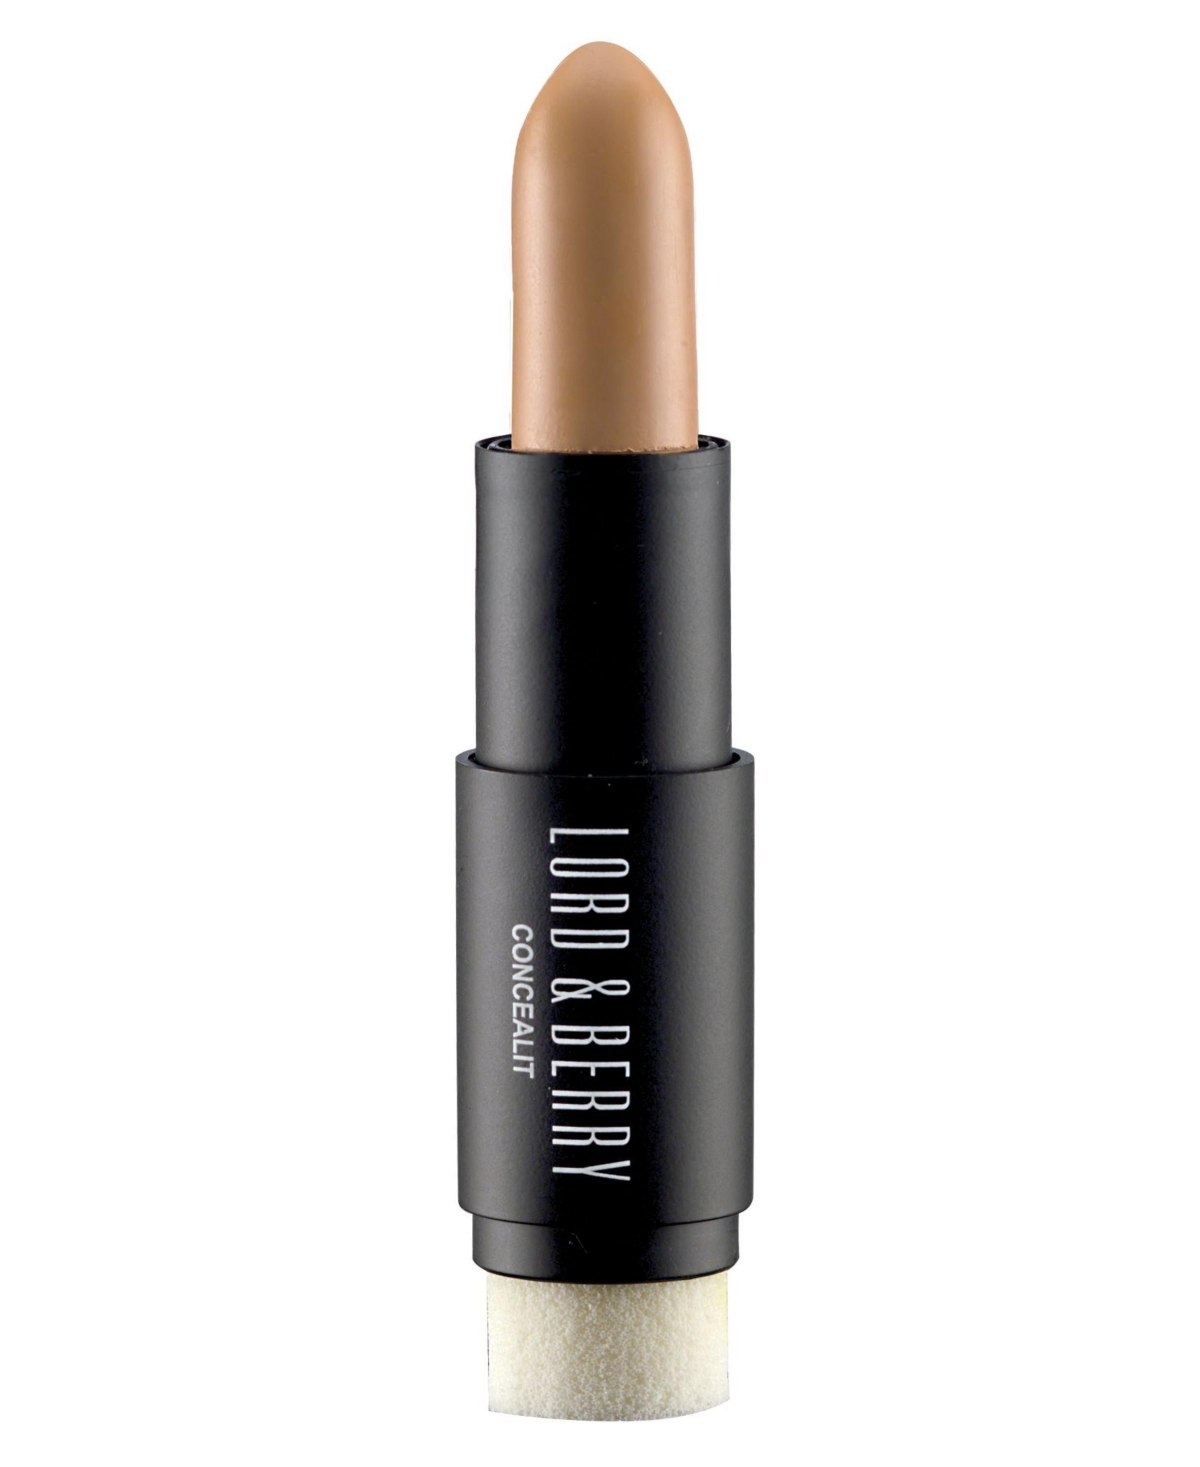 Lord & Berry Conceal It Stick Concealer, 0.07 oz